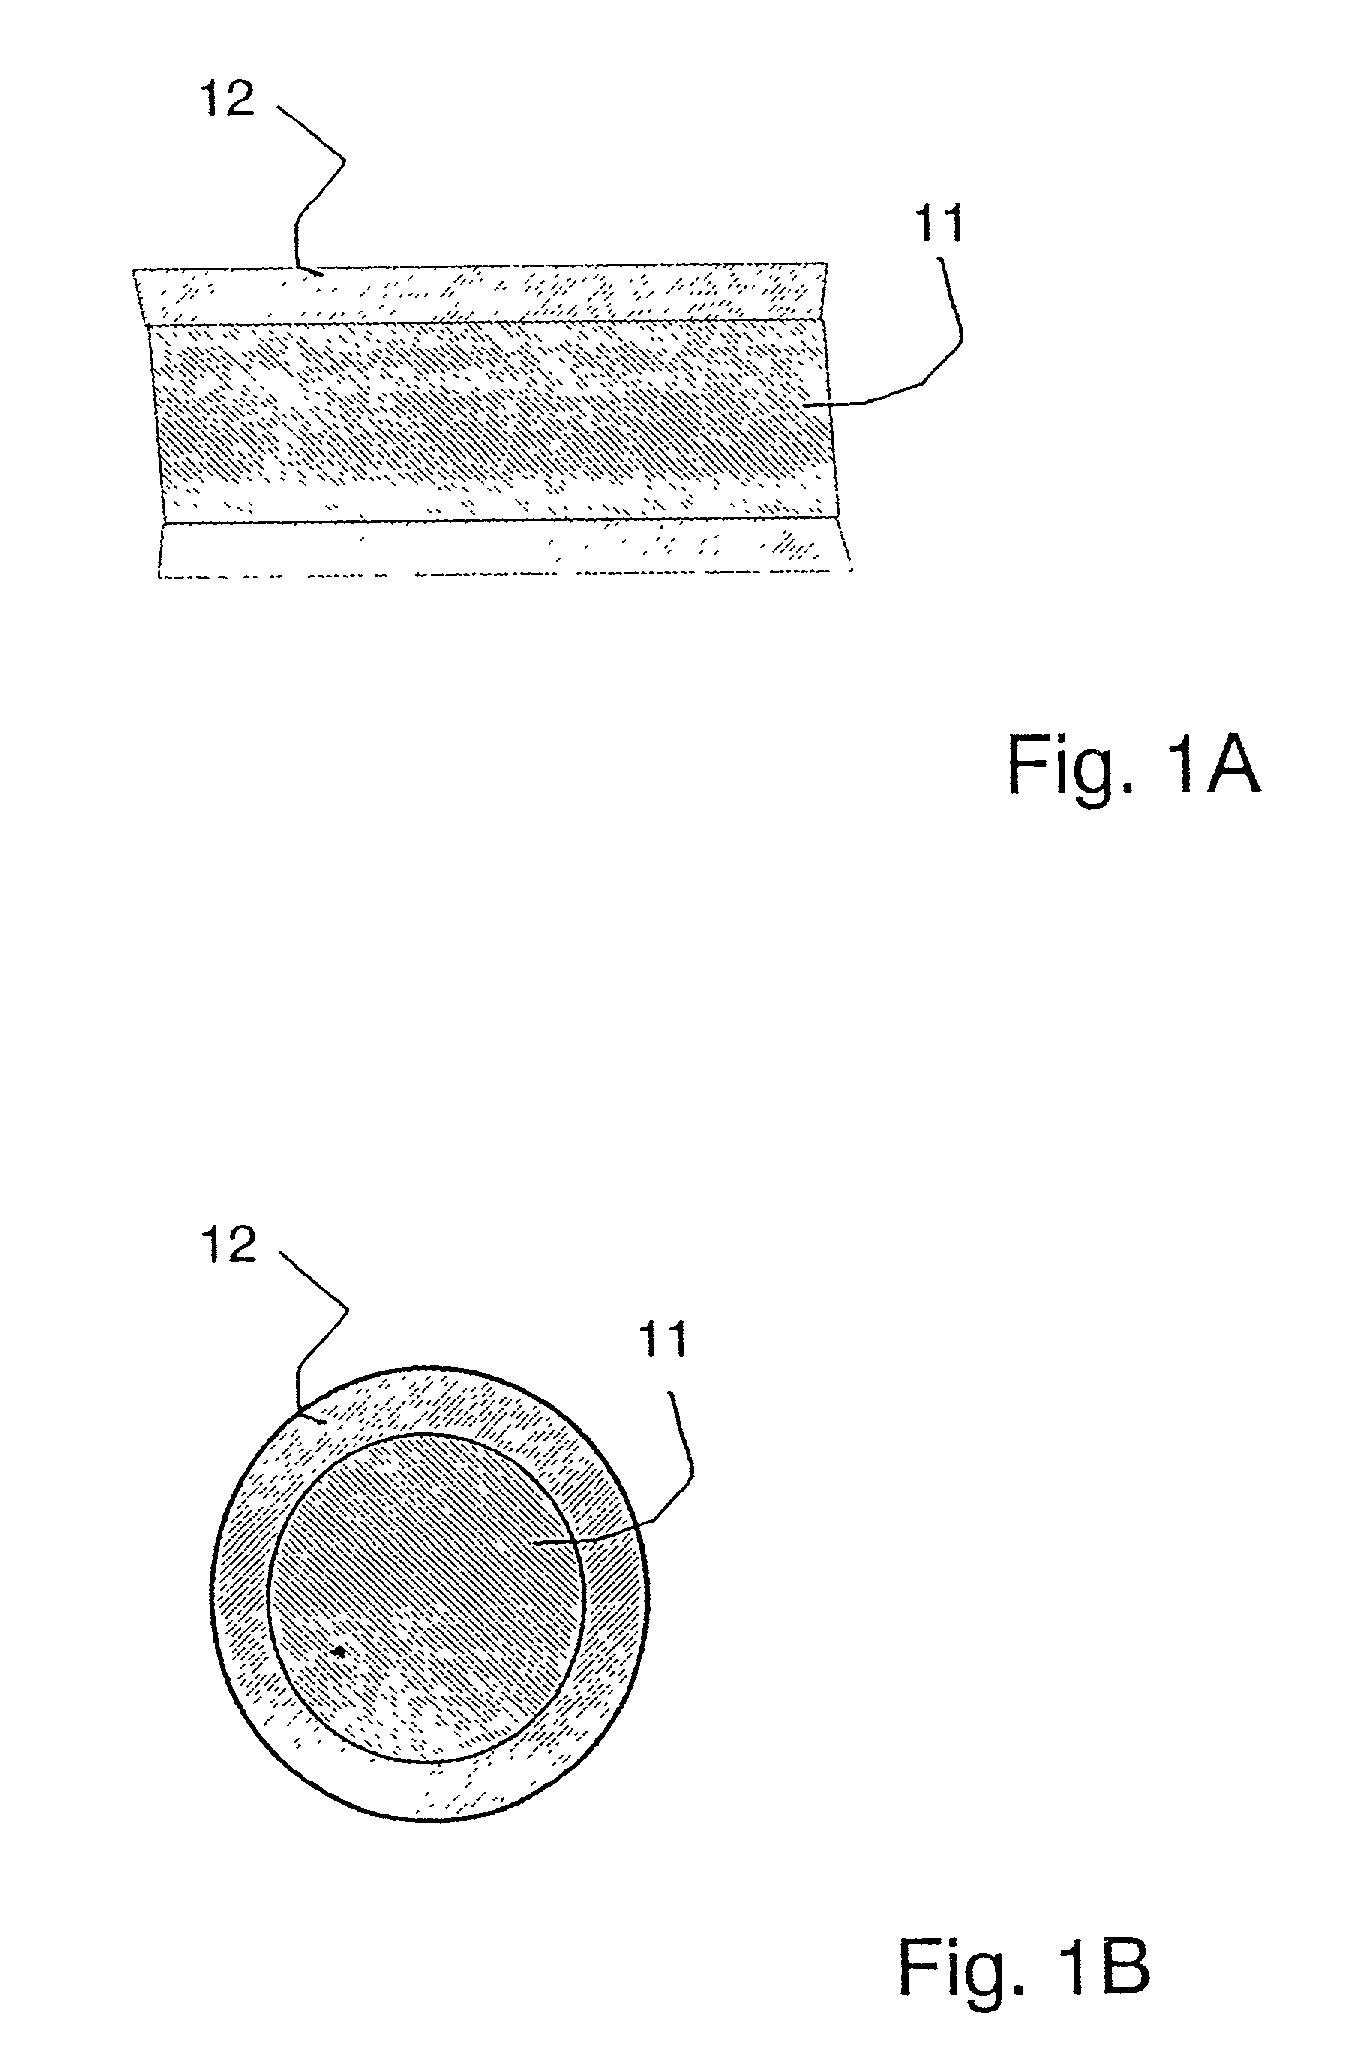 Filter for wire and cable